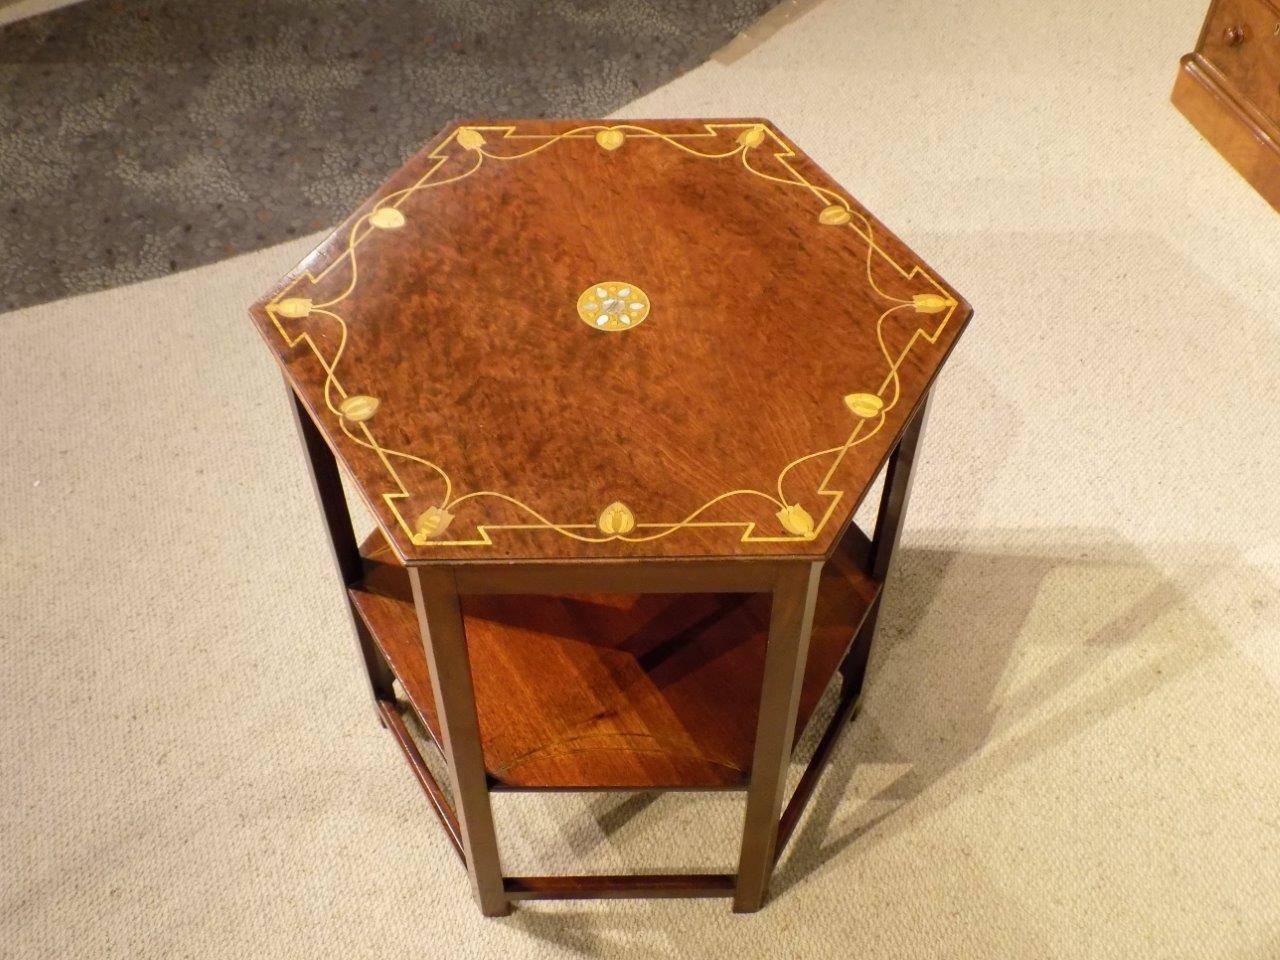 Mahogany Arts & Crafts Period Hexagonal Inlaid Table by Shapland & Petter of B 1